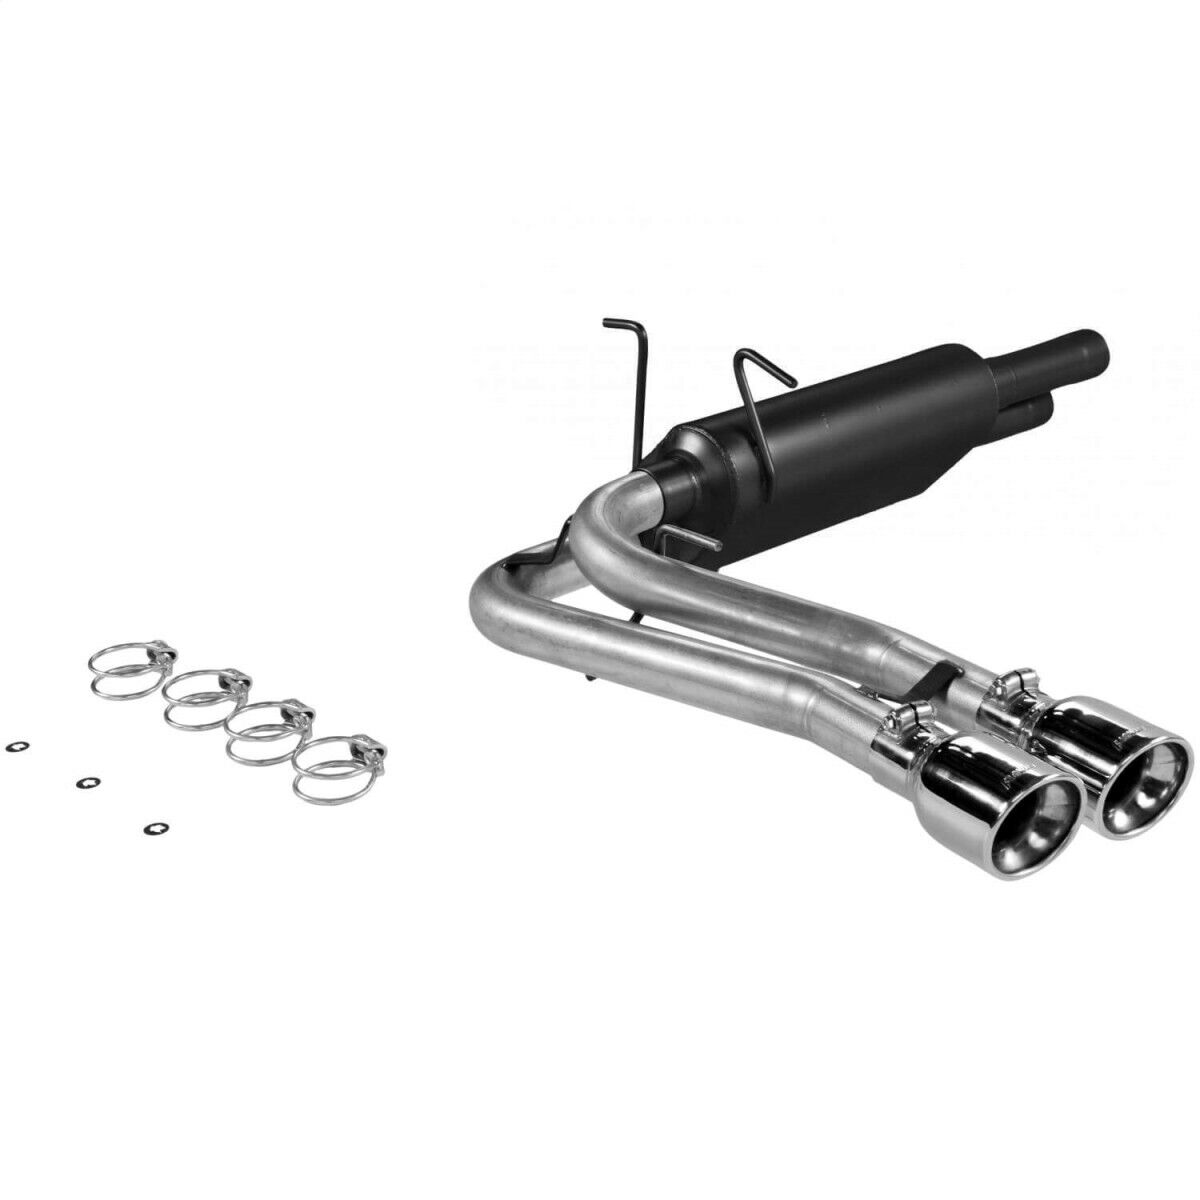 17367 Flowmaster Exhaust System for F150 Truck Ford F-150 Heritage 2004